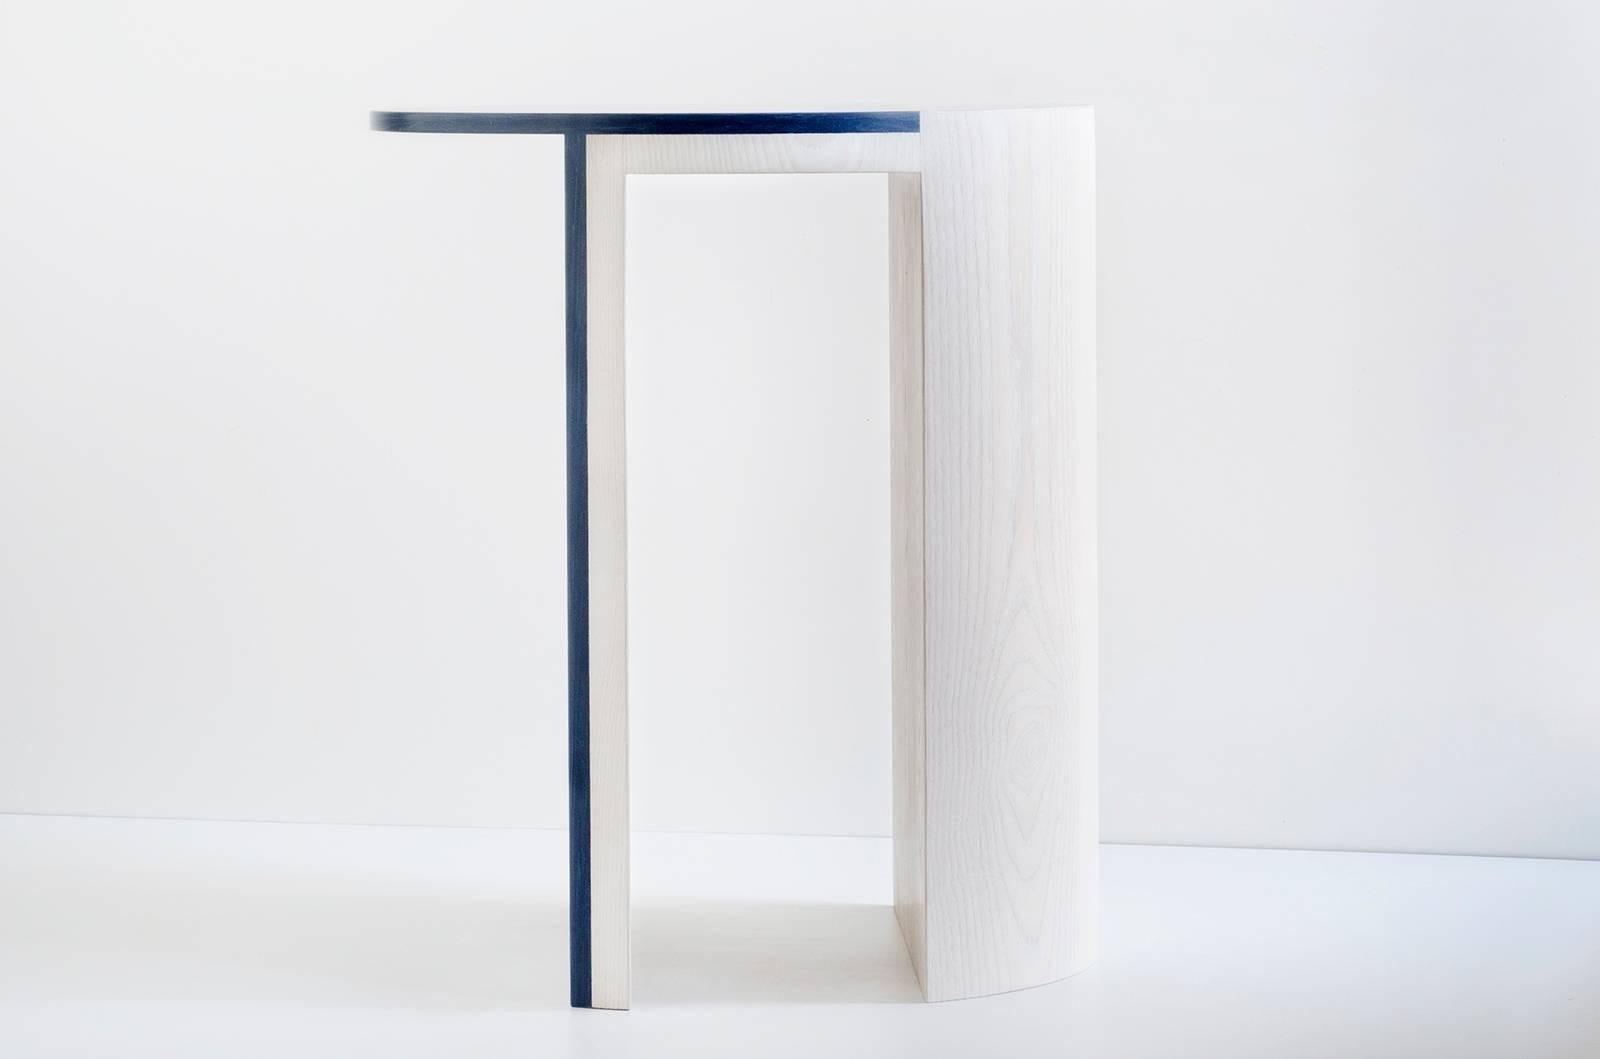 Gibbous Blue and White Side Table by Robert Sukrachand, Made in USA (Sonstiges) im Angebot